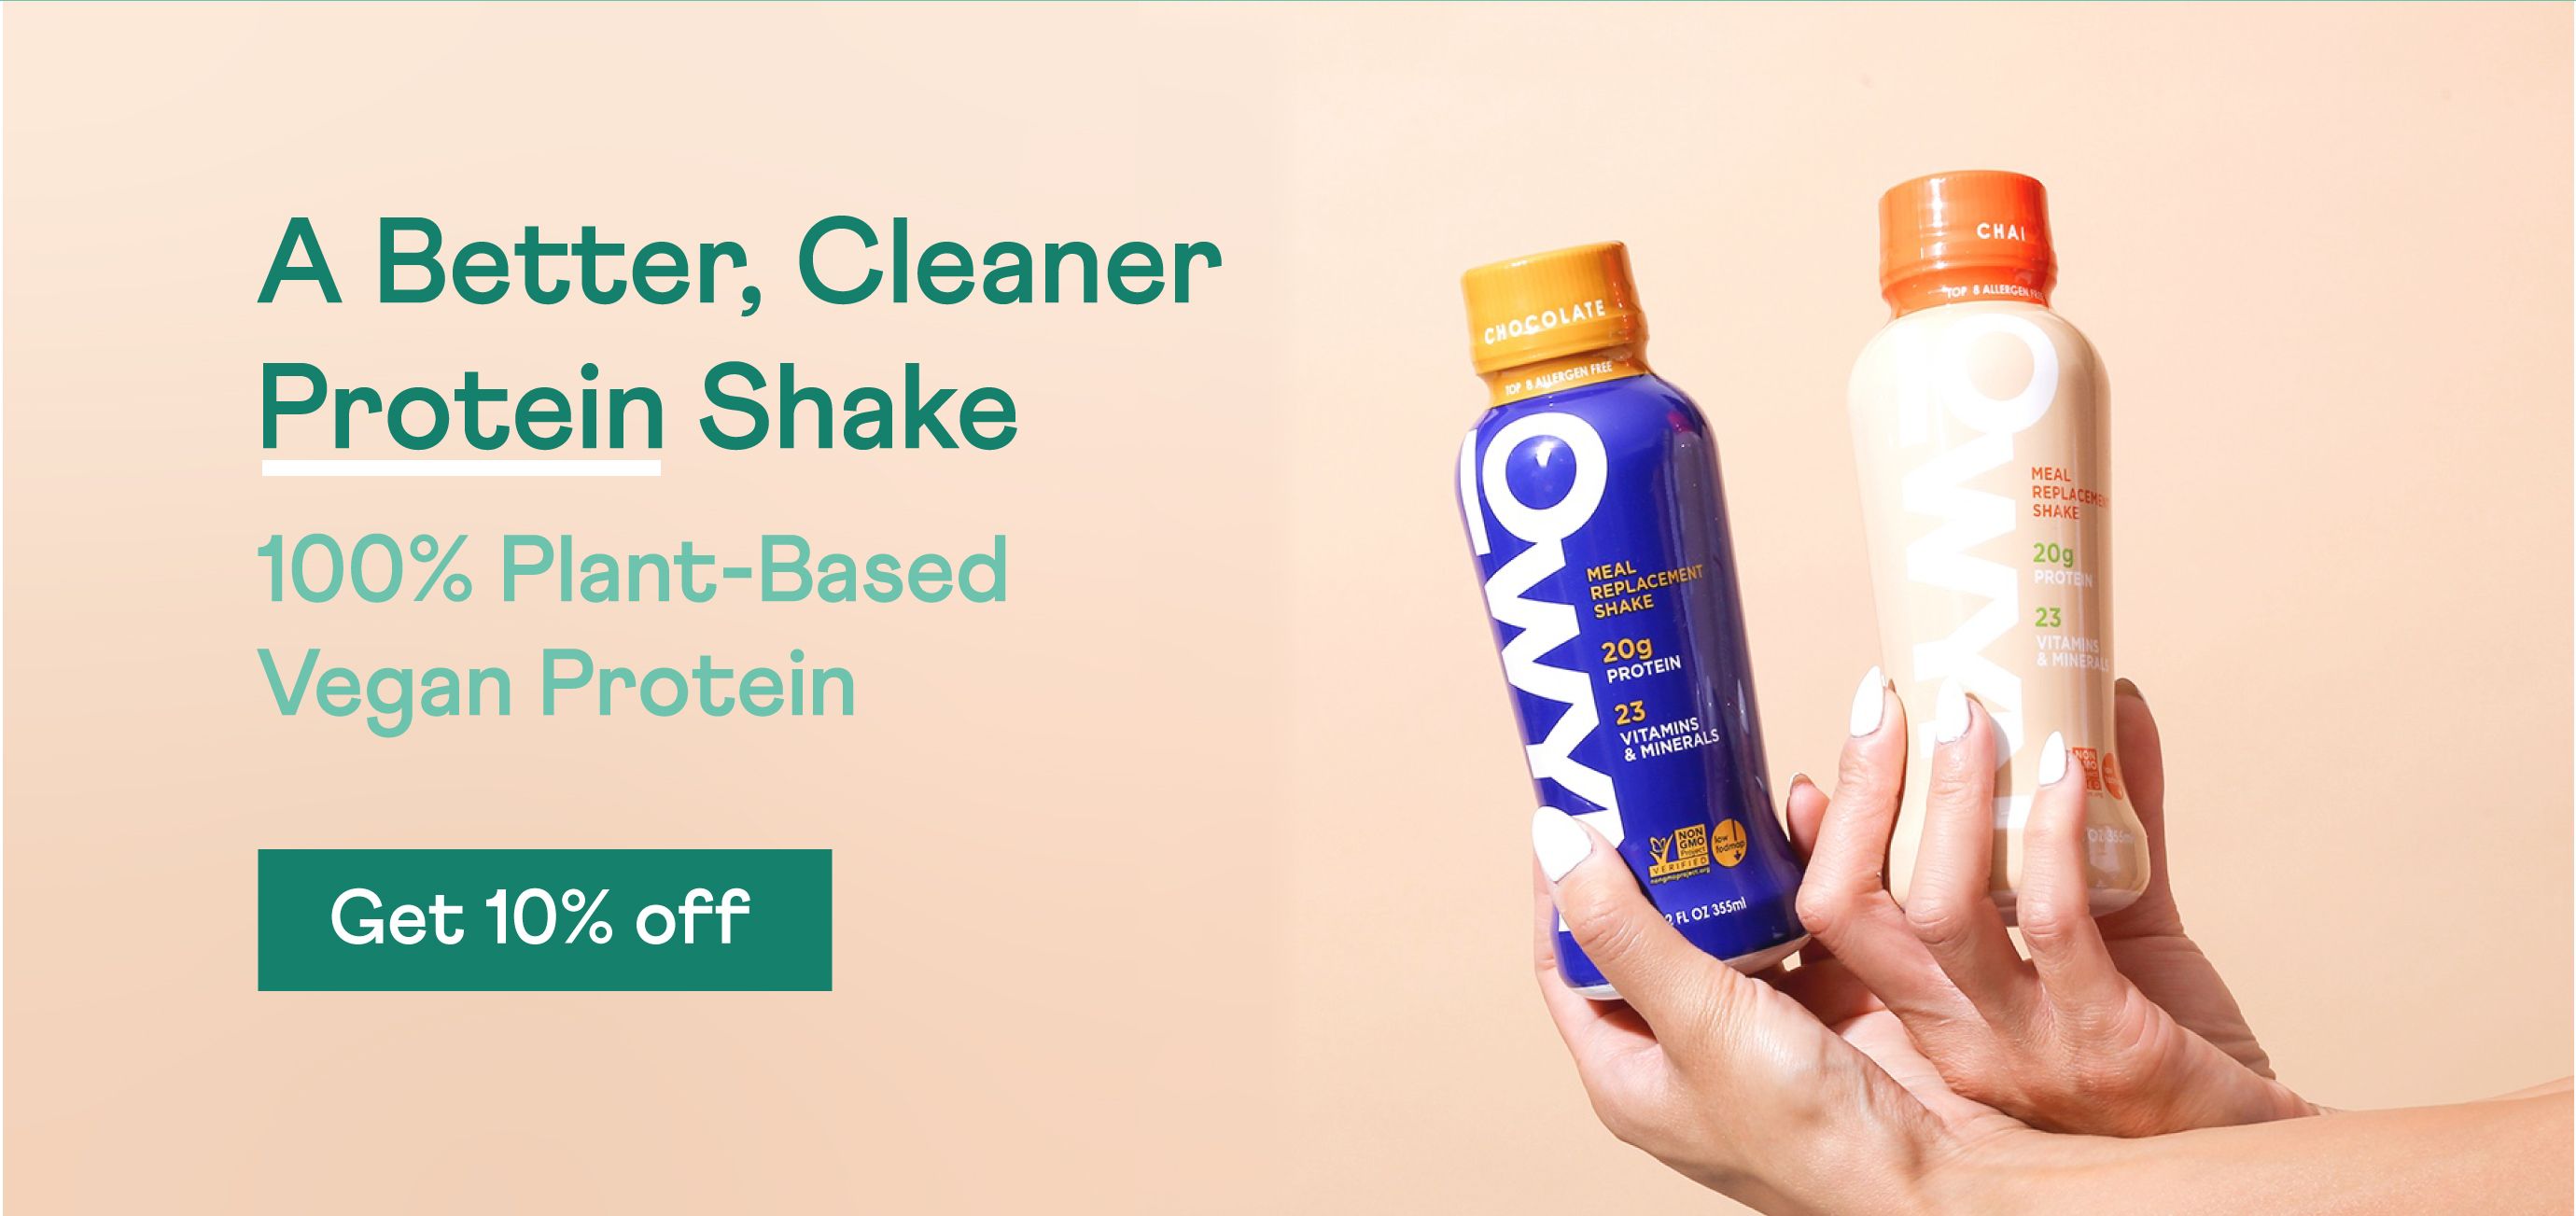 A Better, Cleaner Protein Shake - Get 10% Off